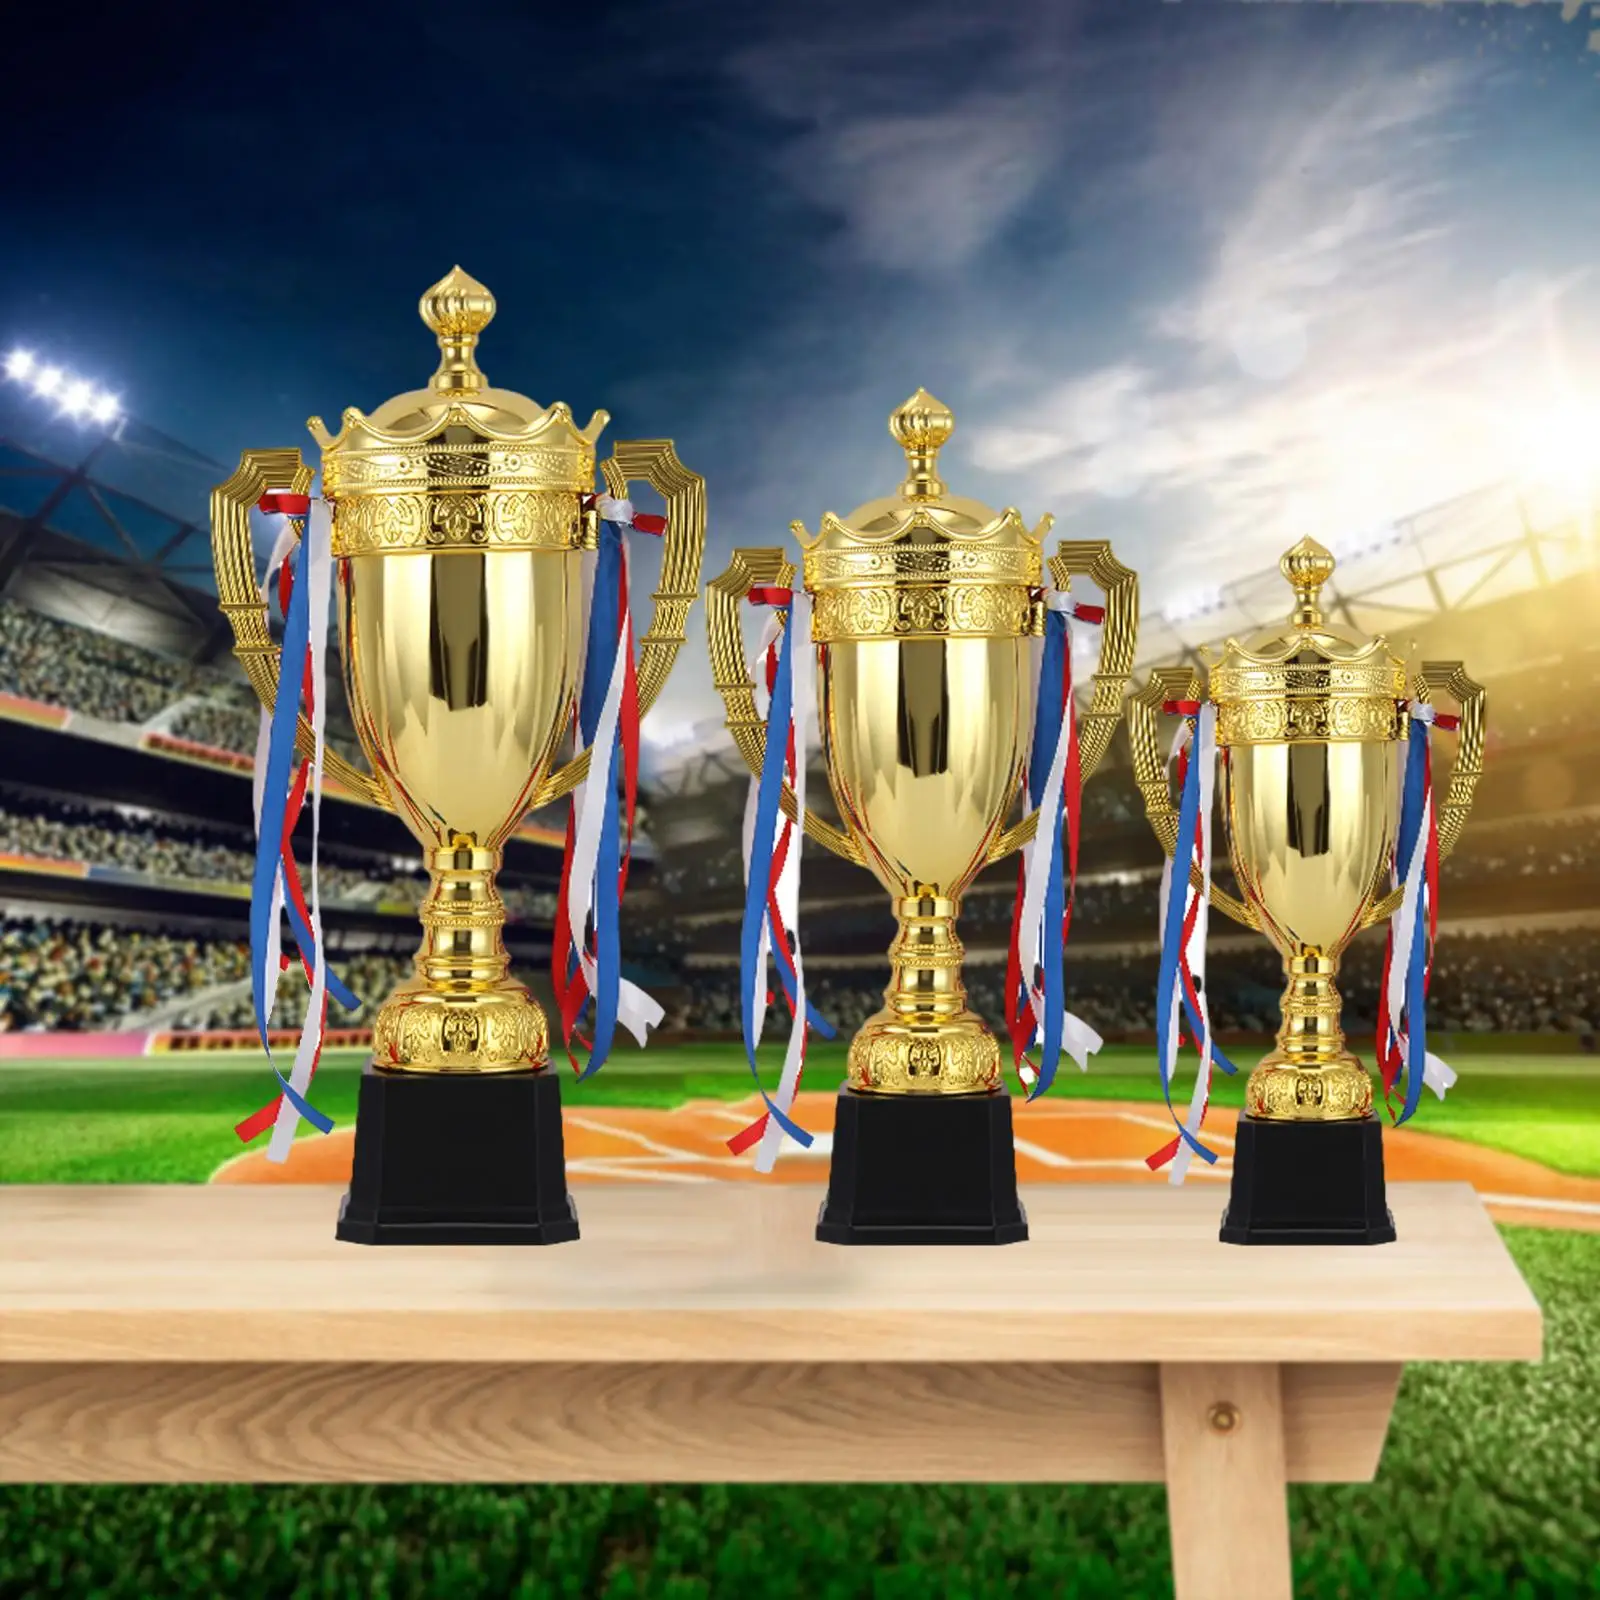 Award Trophy Cup Fine Workmanship Funny Trophy Children Trophy for Award Ceremonies Competitions Party Favors Football Rewards